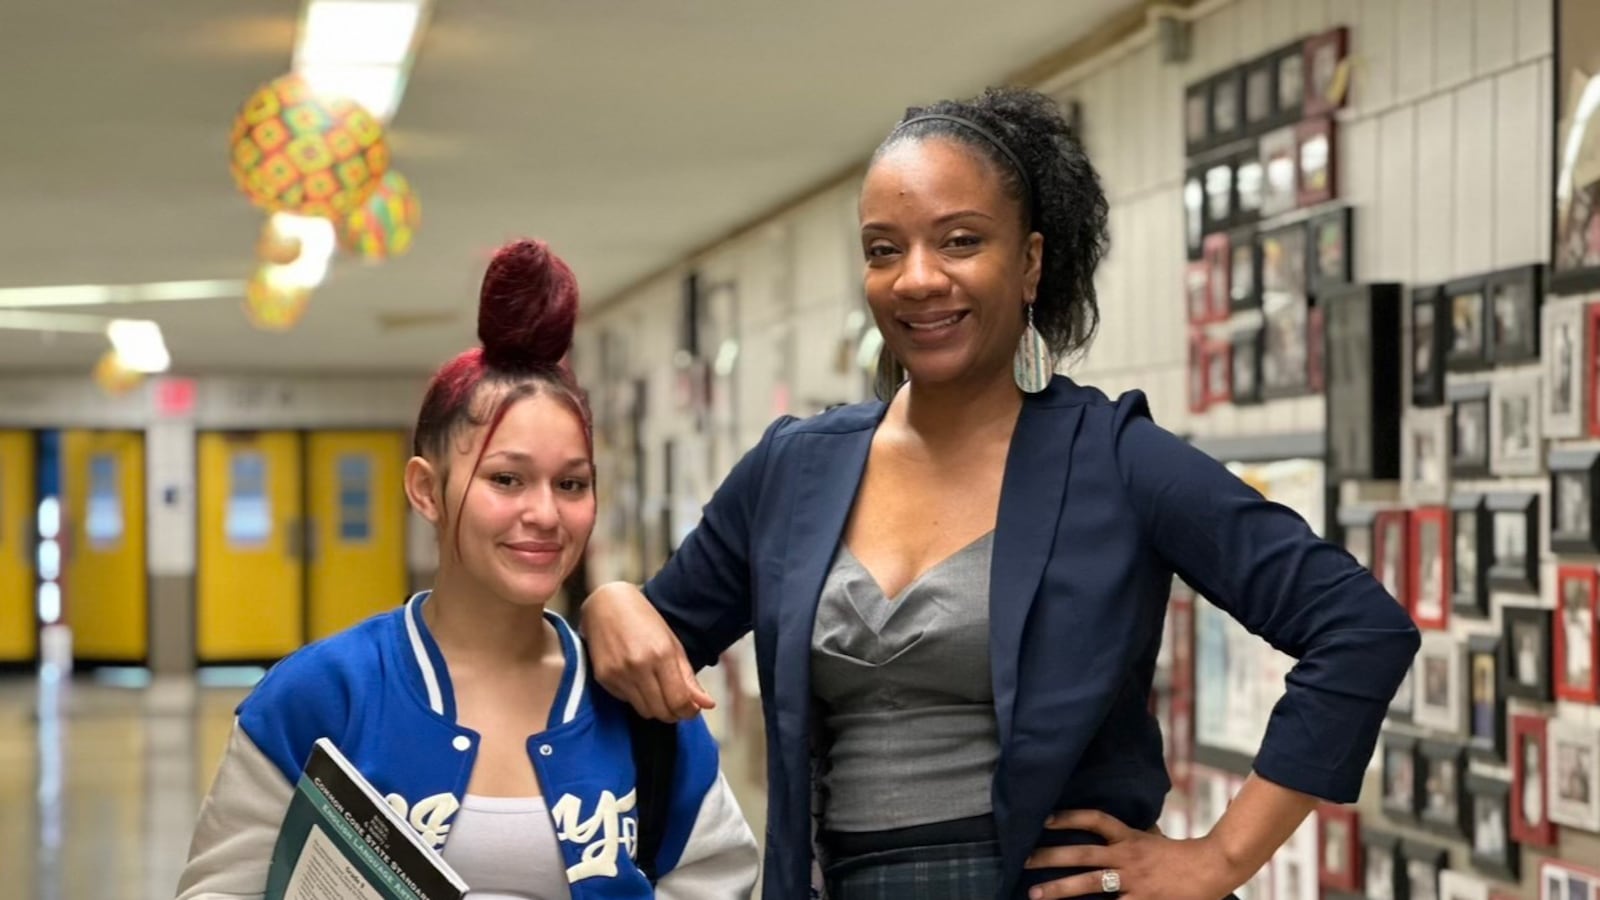 A student and a teacher stand together in a school hallway and pose for a photo.